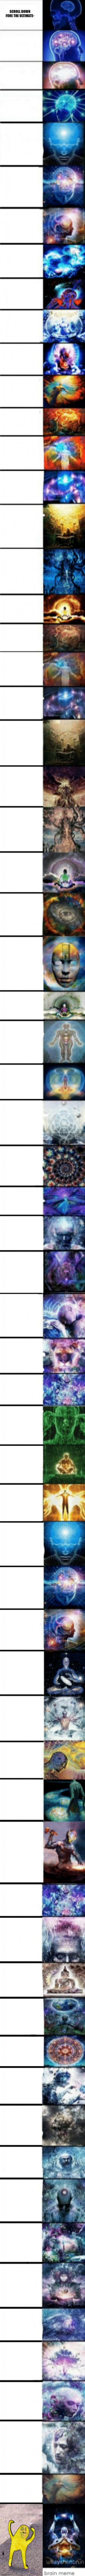 I lost my sanity scrolling dowm this | SCROLL DOWN FORE THE ULTIMATE- | image tagged in overly extended expanding brain meme template | made w/ Imgflip meme maker